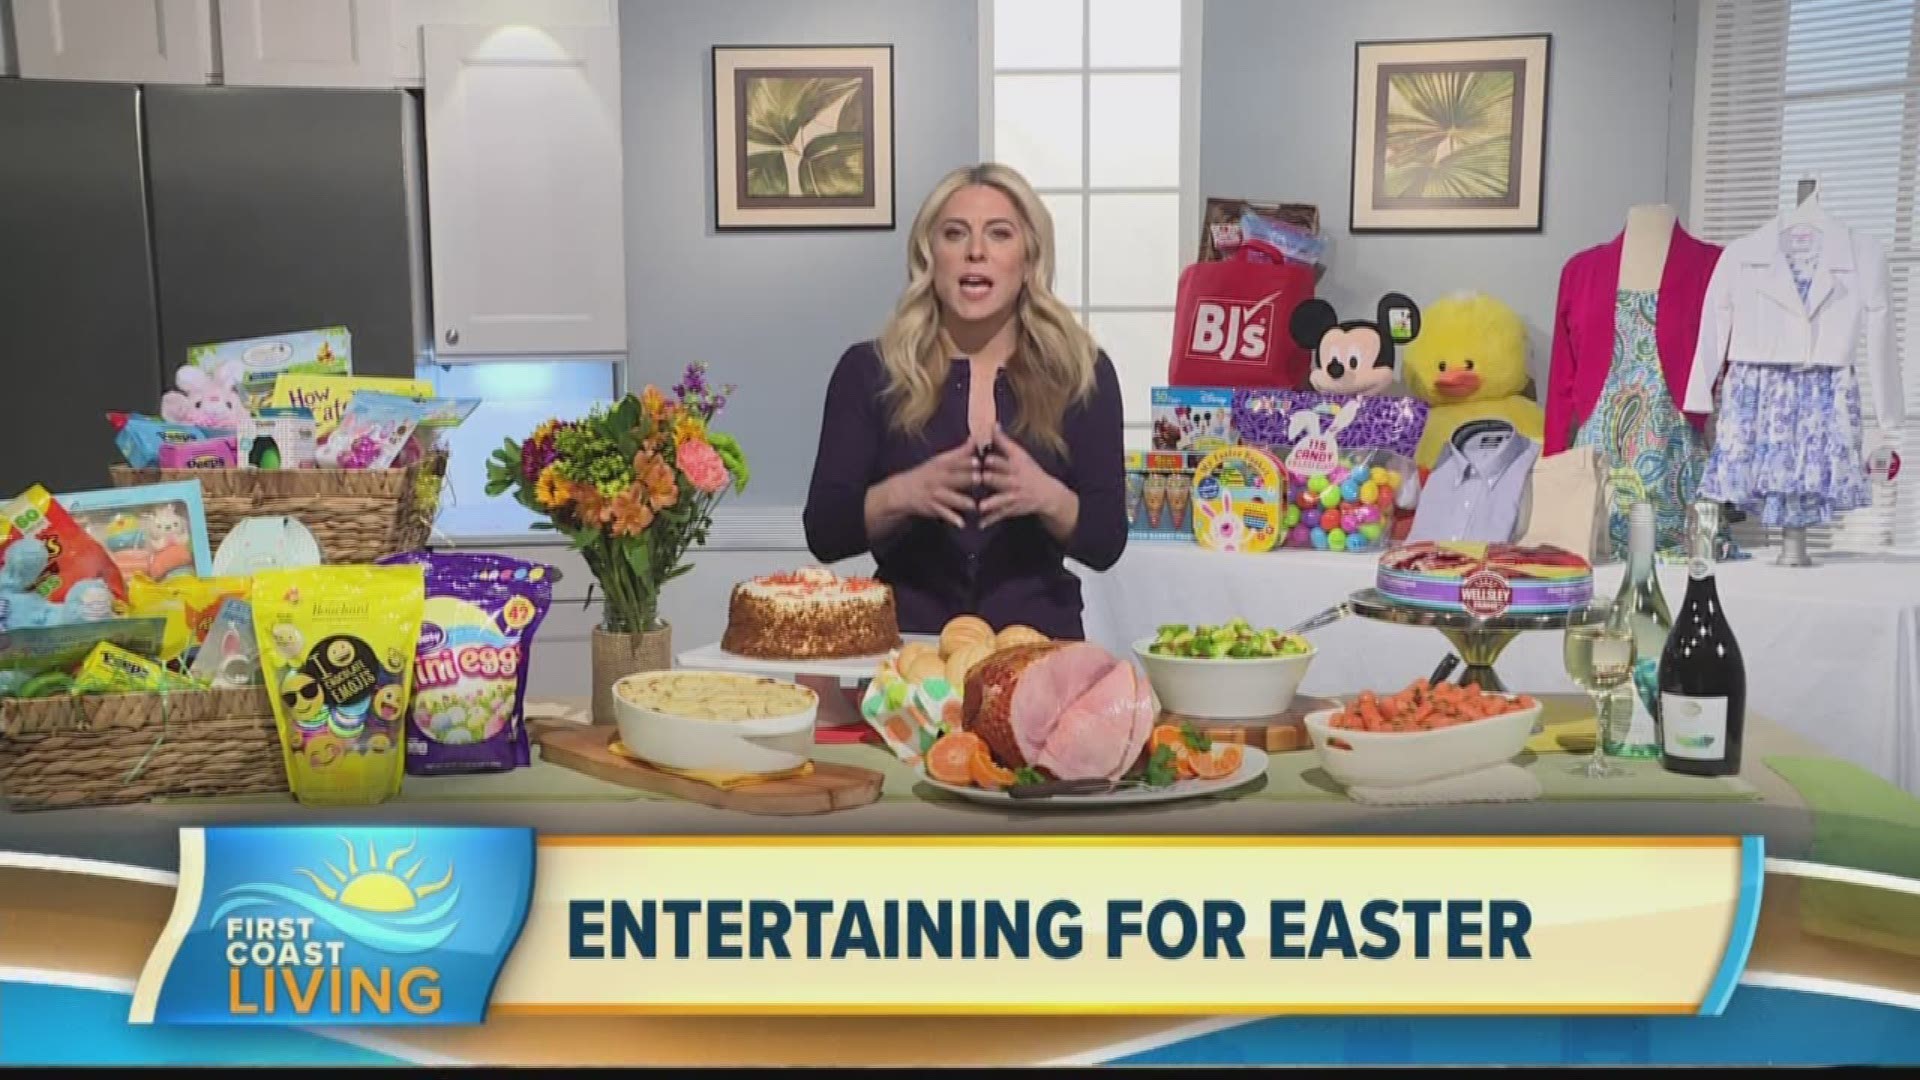 Are you ready to entertain this Easter?